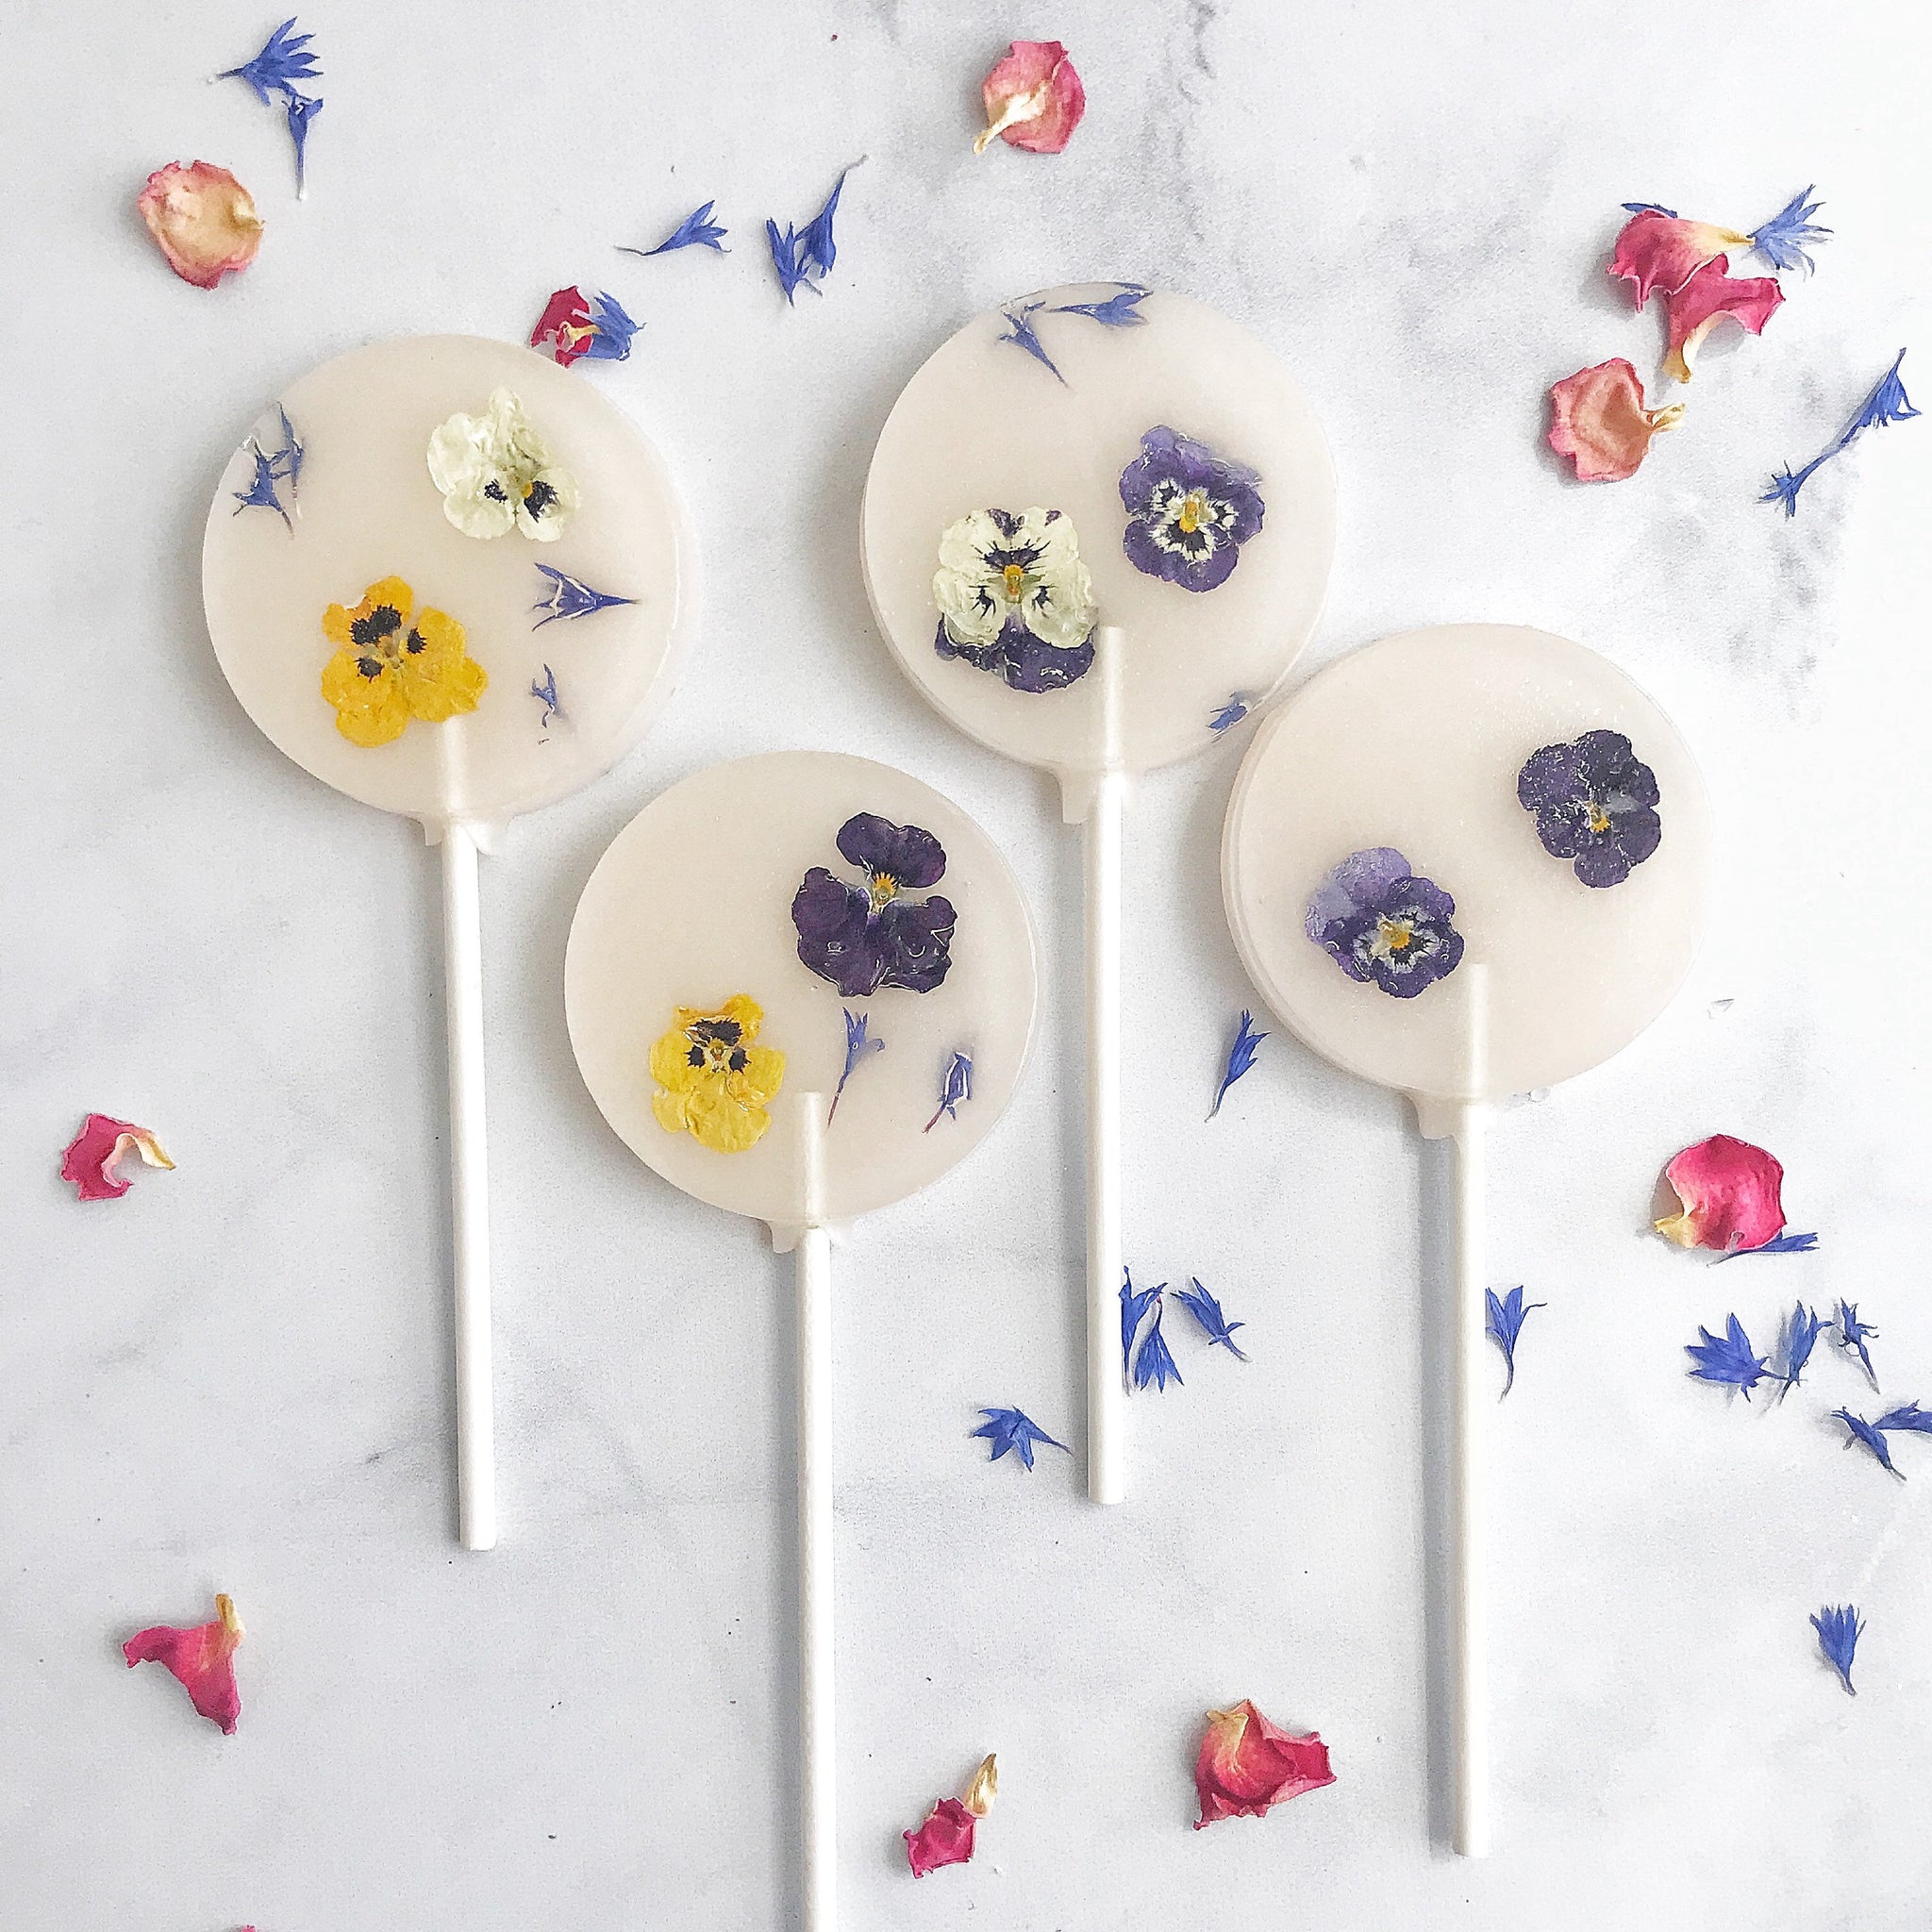 Flower Lollipop  -Spring Flower Lollipop - Flower lollipop gift - Mother's day lollipop gift - Mother's day flowers